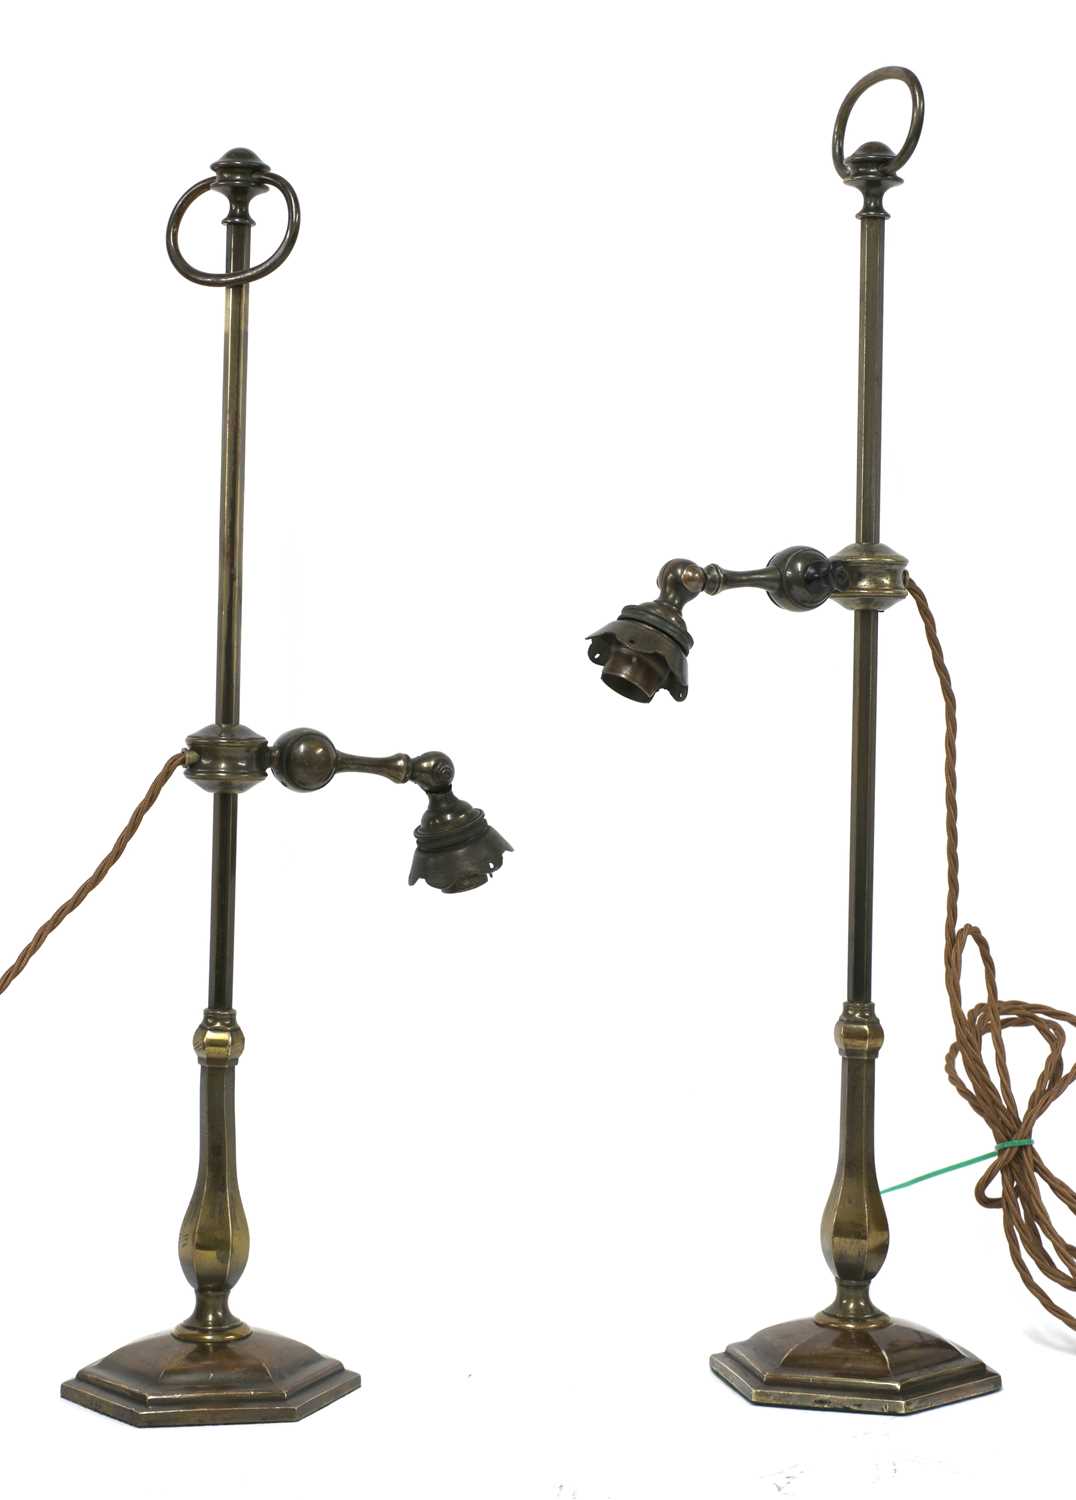 Lot 70 - A pair of Faraday & Sons adjustable library lamps